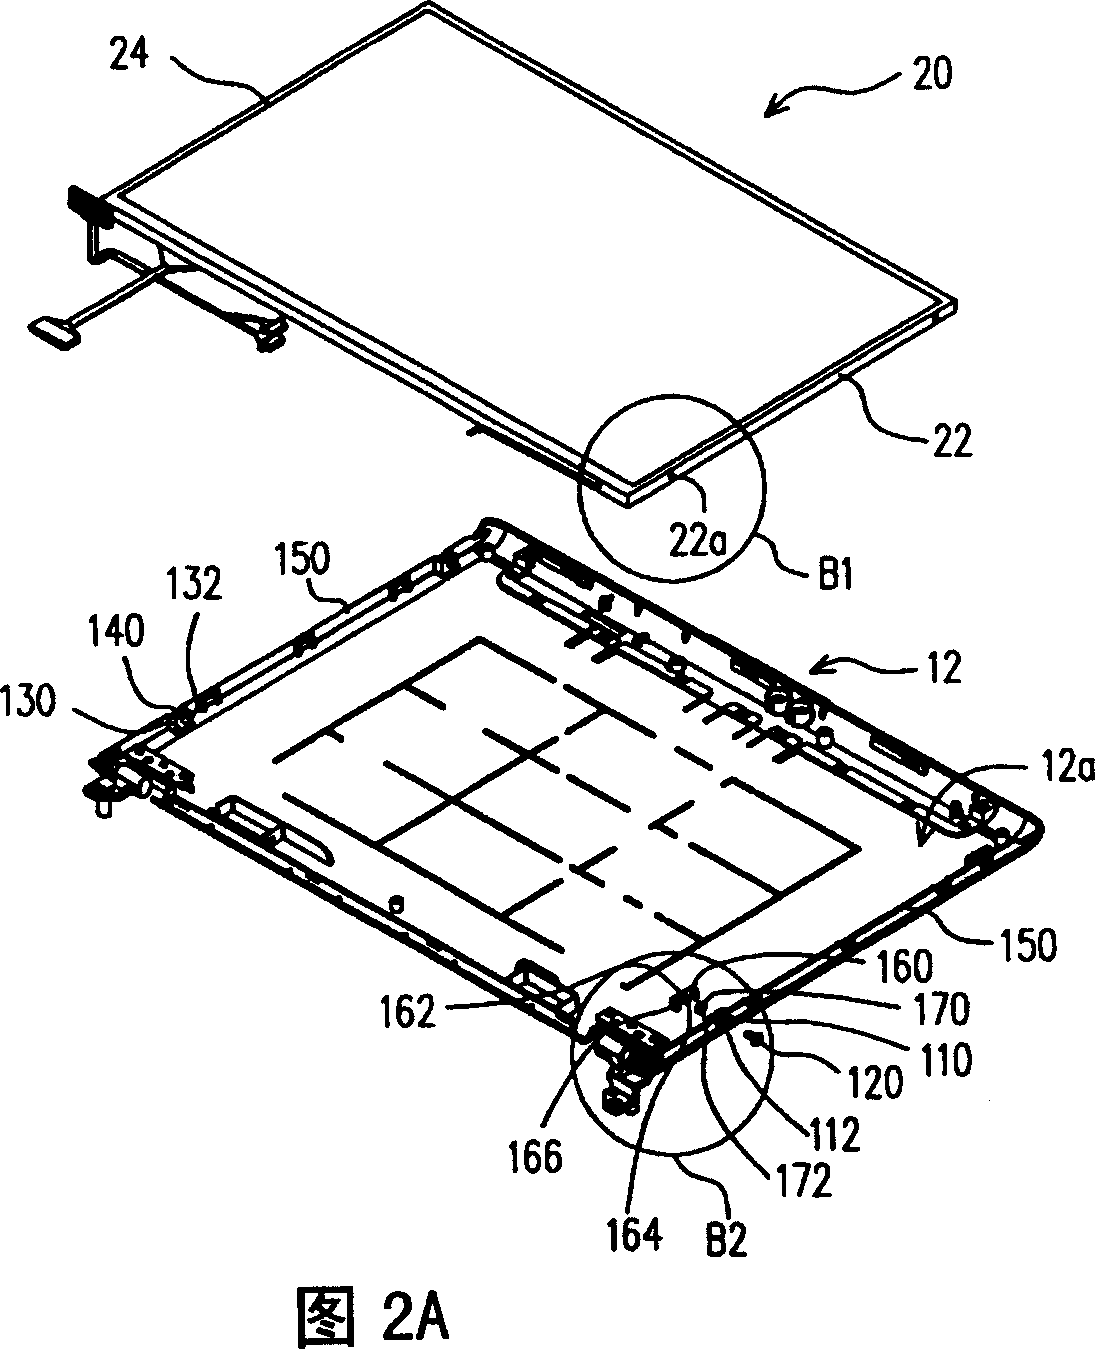 Structure for assembling faceplate